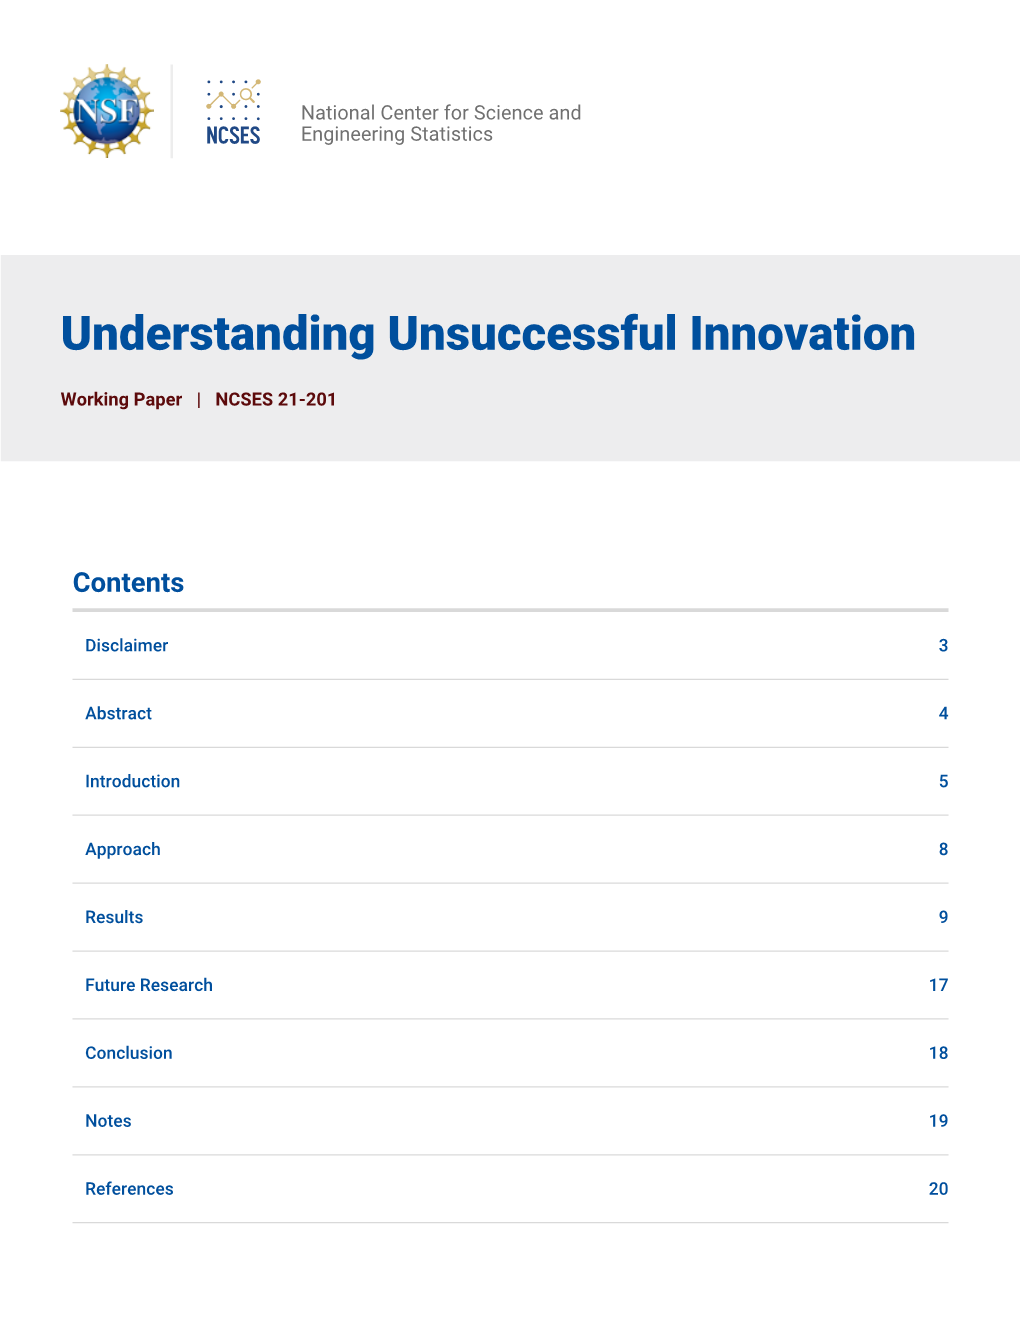 Understanding Unsuccessful Innovation, NCSES 21-201